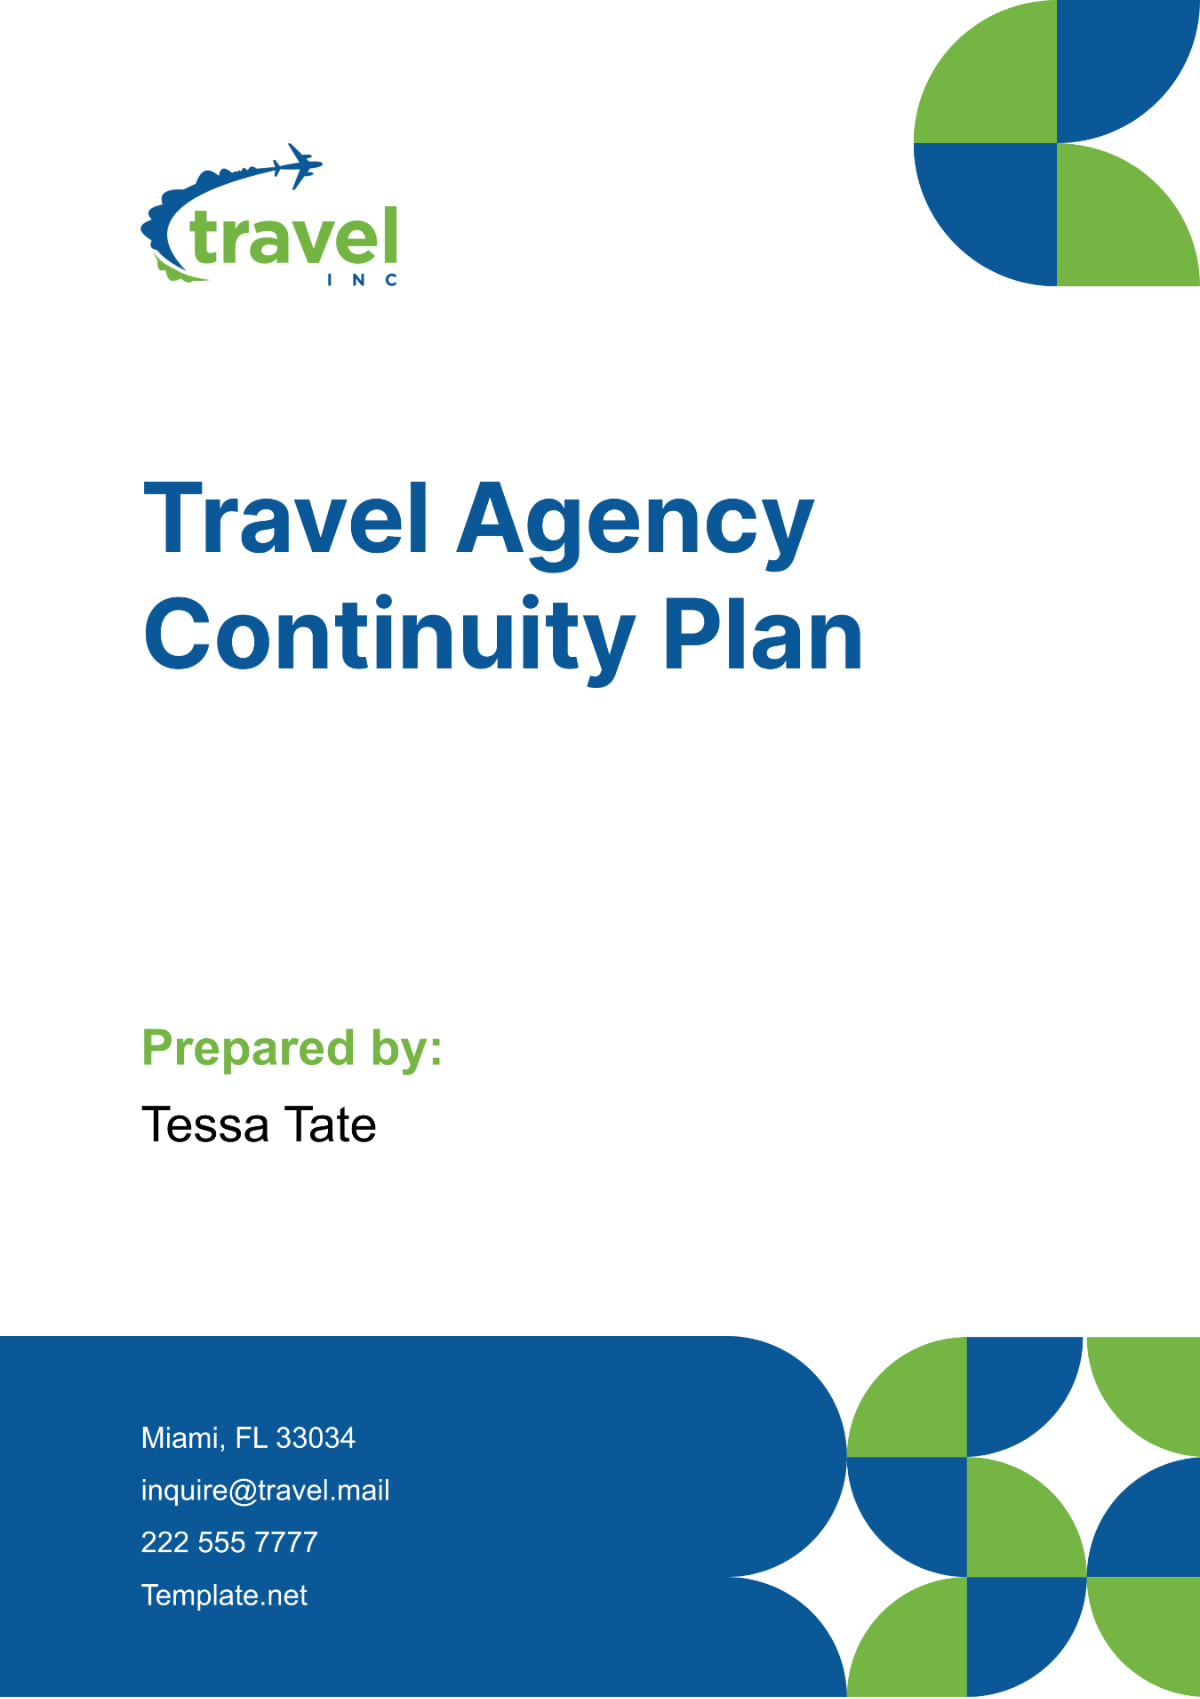 Travel Agency Continuity Plan Template